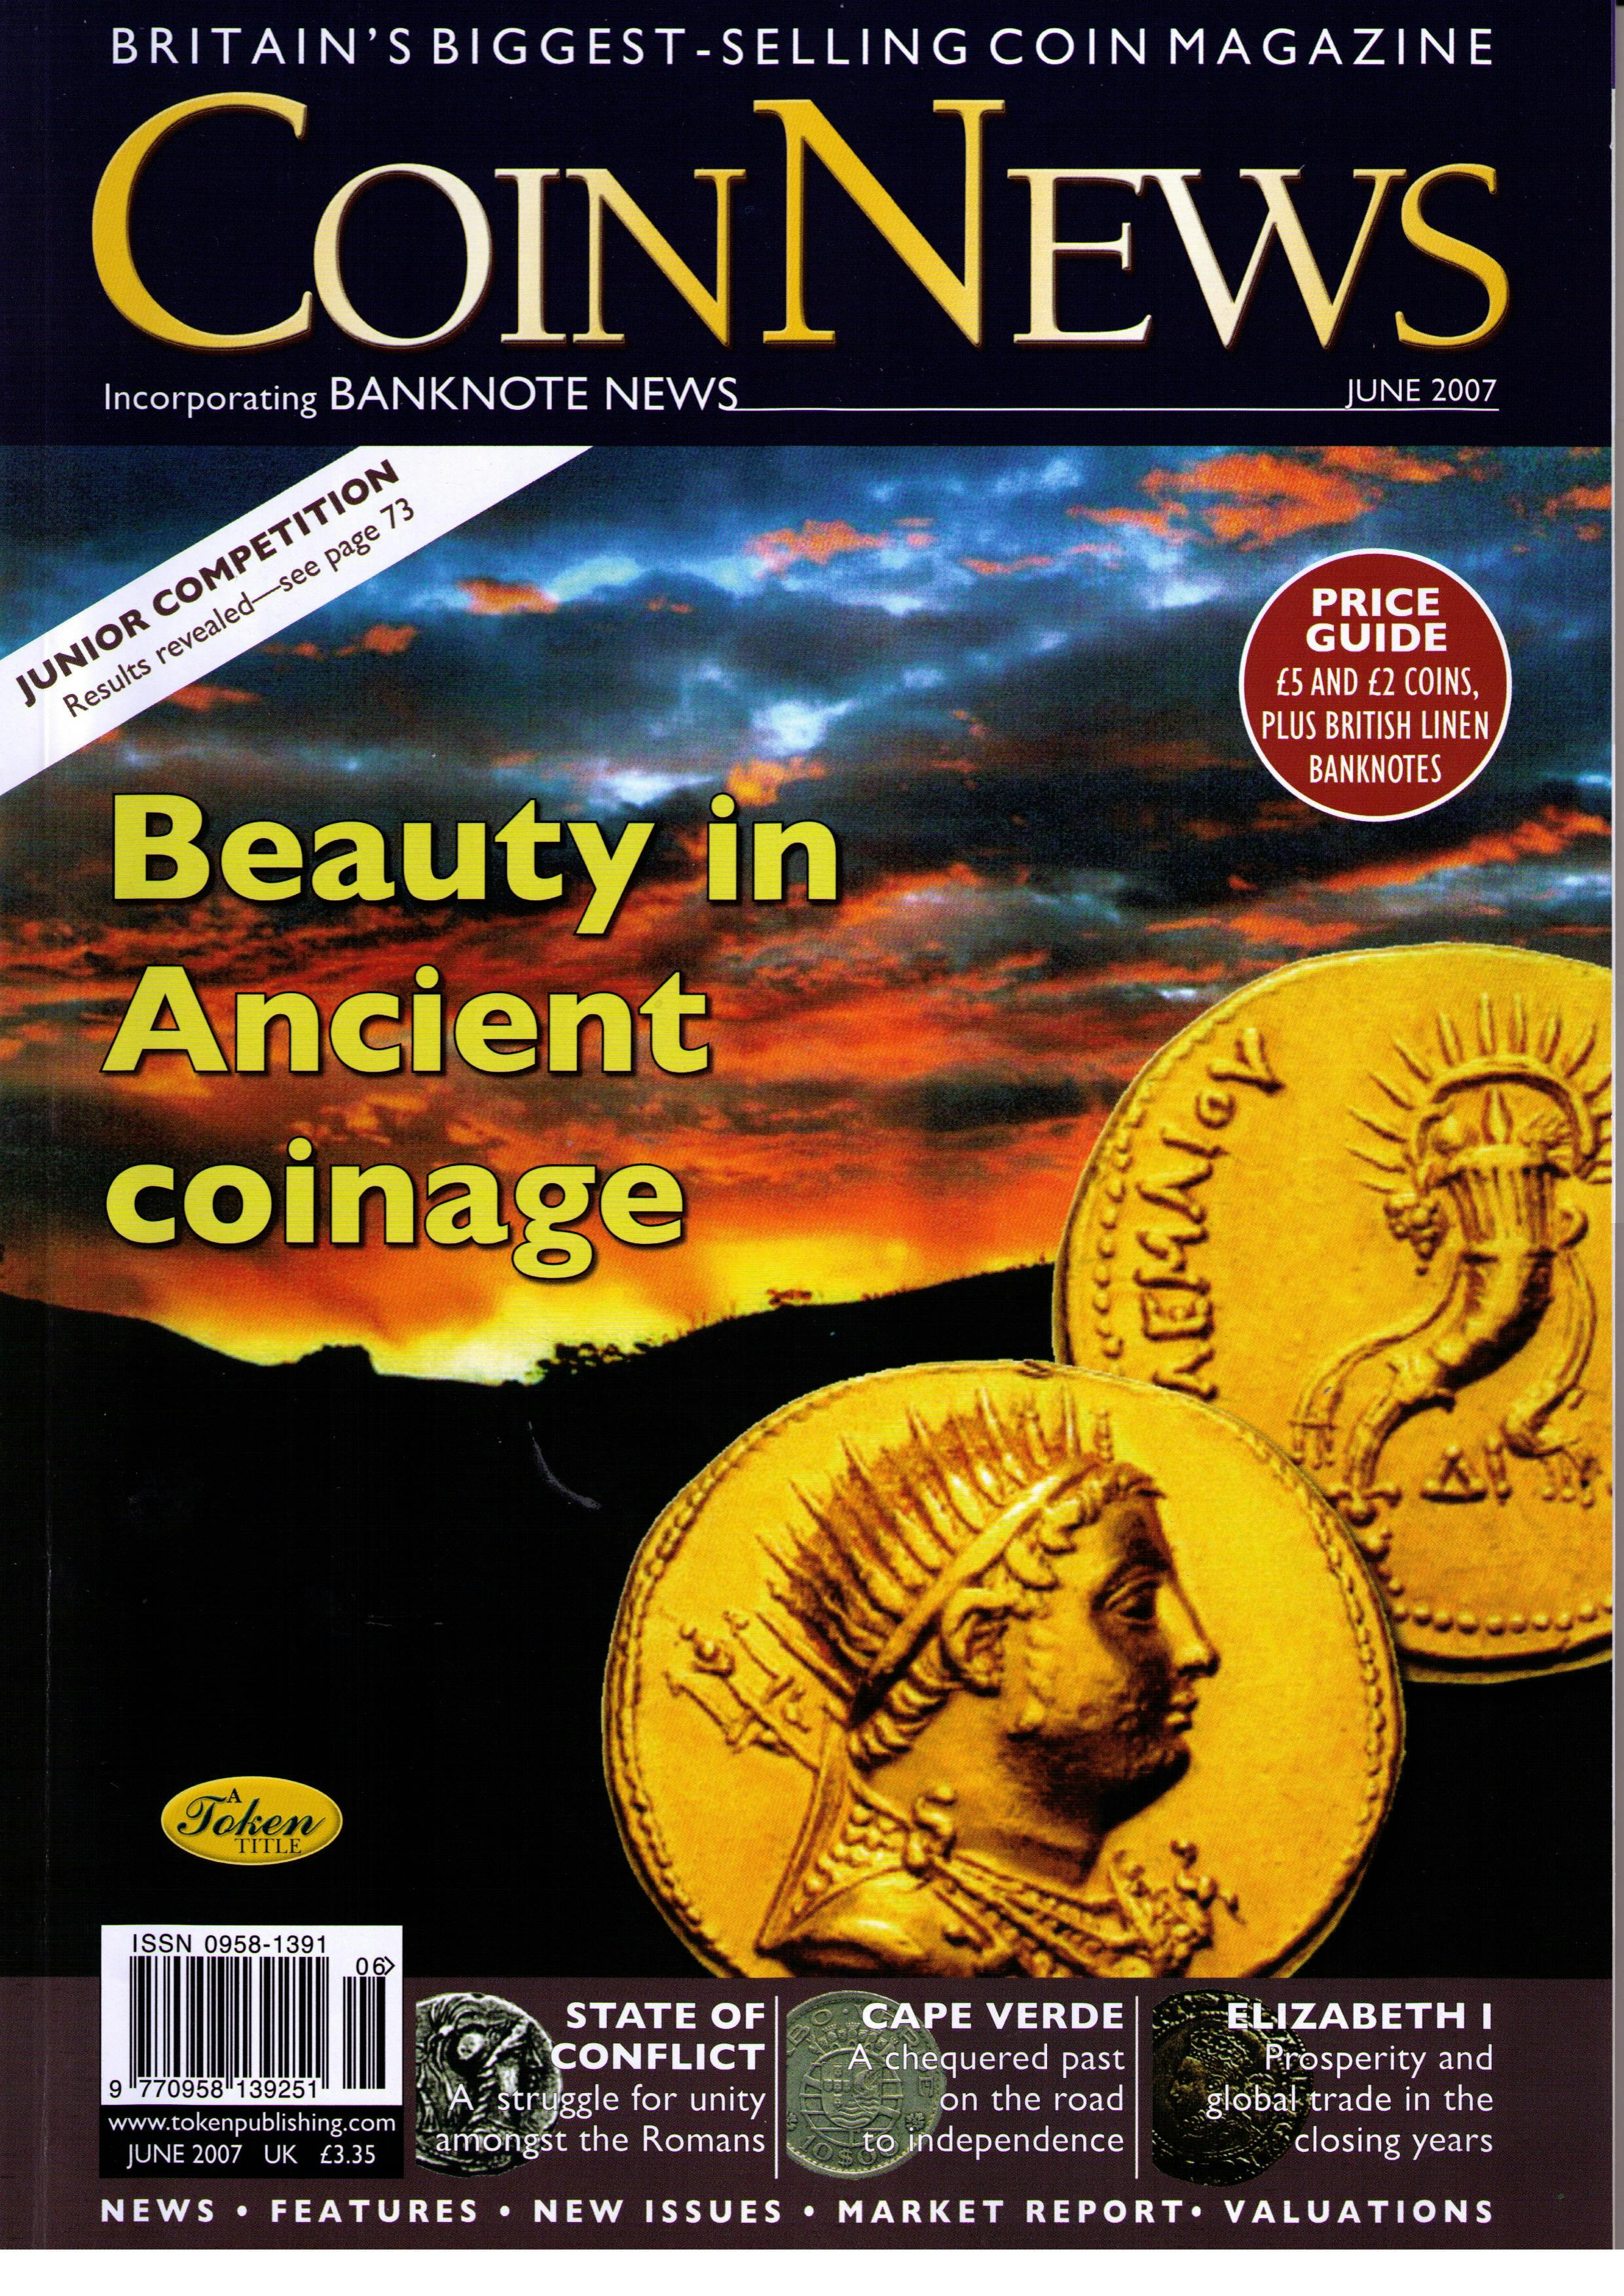 Front cover of 'Looking to the future...', Coin News June 2007, Volume 44, Number 6 by Token Publishing